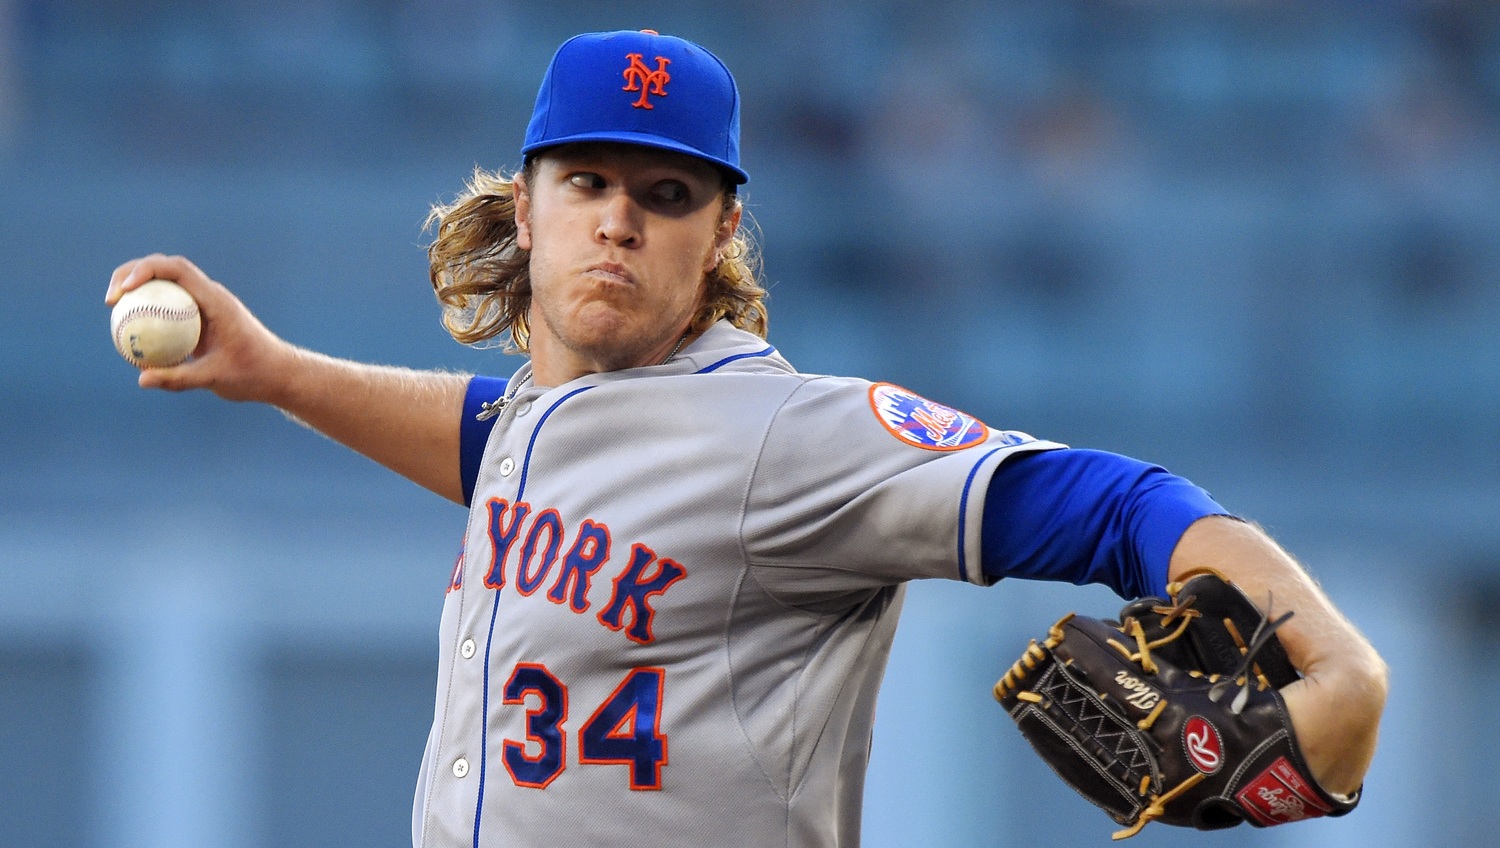 Noah Syndergaard of the New York Mets appearing in Game of Thrones Season 7, Watchers on the Wall